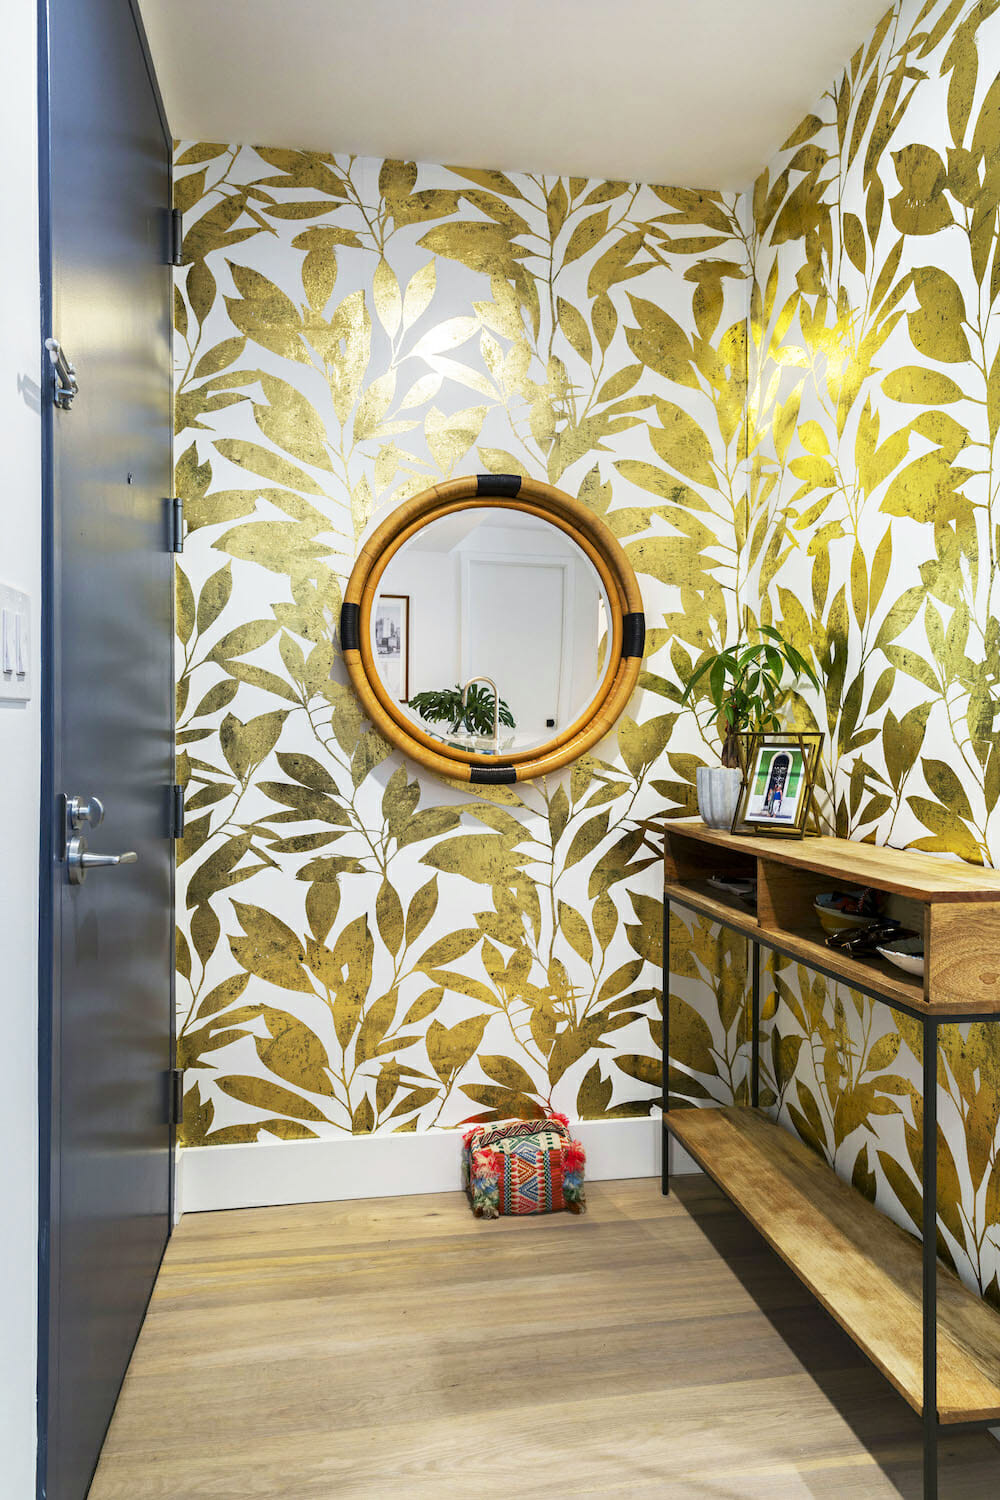 Image of an entryway with a leaf-patterned wallpaper in gold